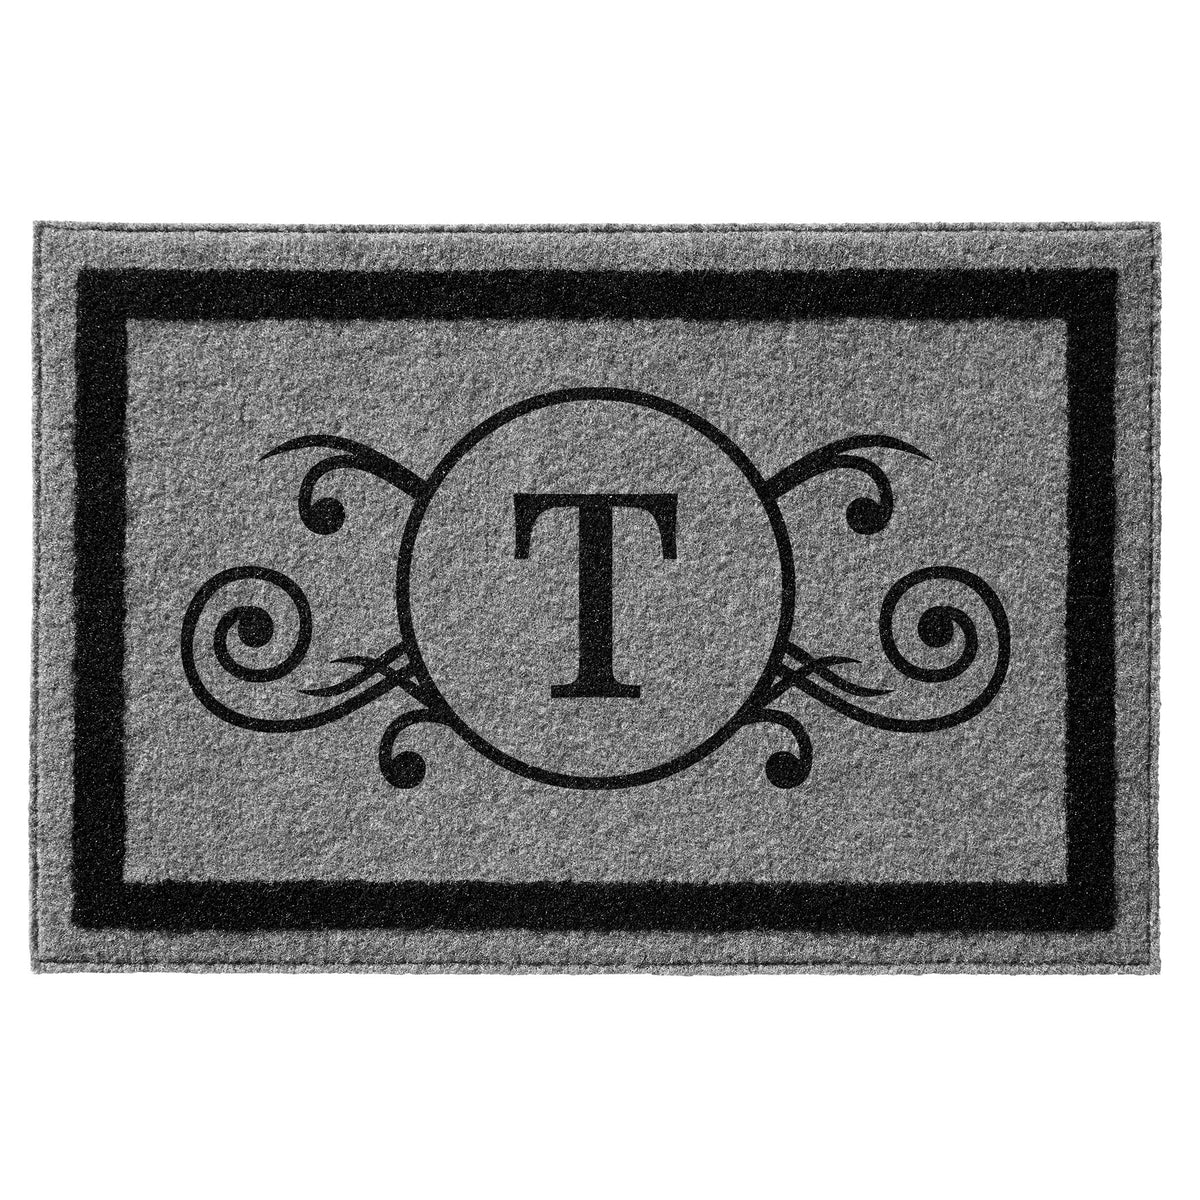 Infinity Custom Mats™ All-Weather Personalized Door Mat - STYLE: MONOGRAM SCROLL COLOR: GREY / BLACK - rugsthatfit.com